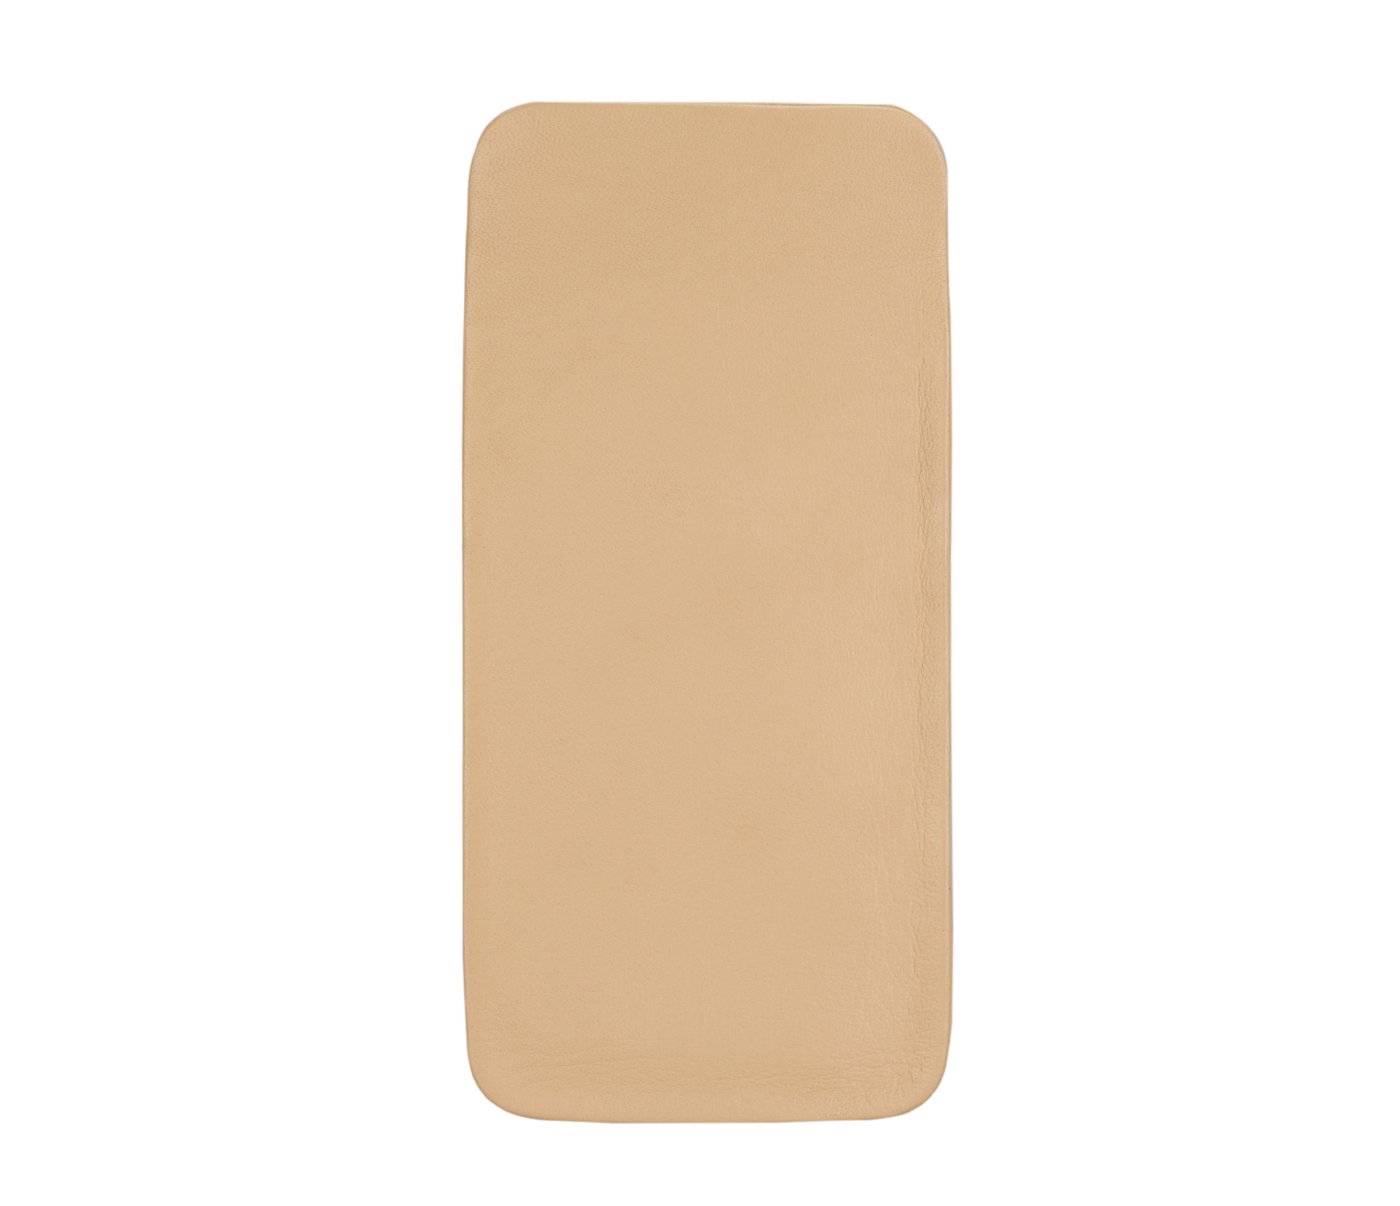 VW11--Soft stitch free spectacle case in Genuine Leather - Beige